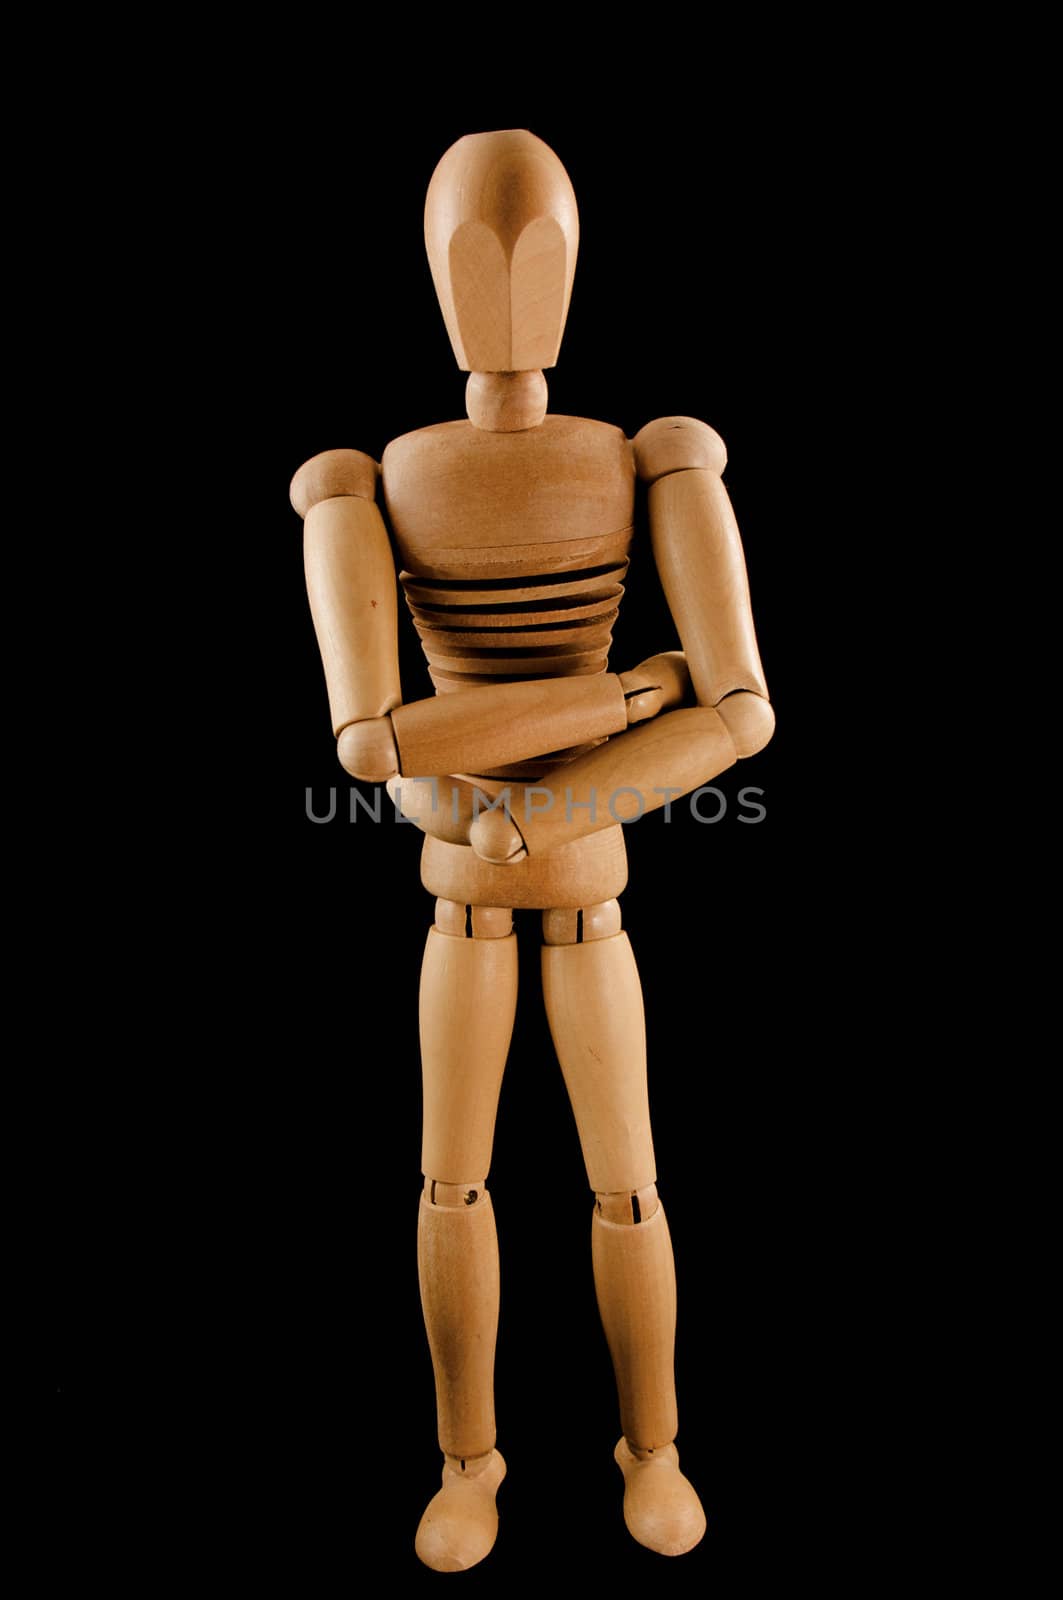 A wooden armature crosses his arms